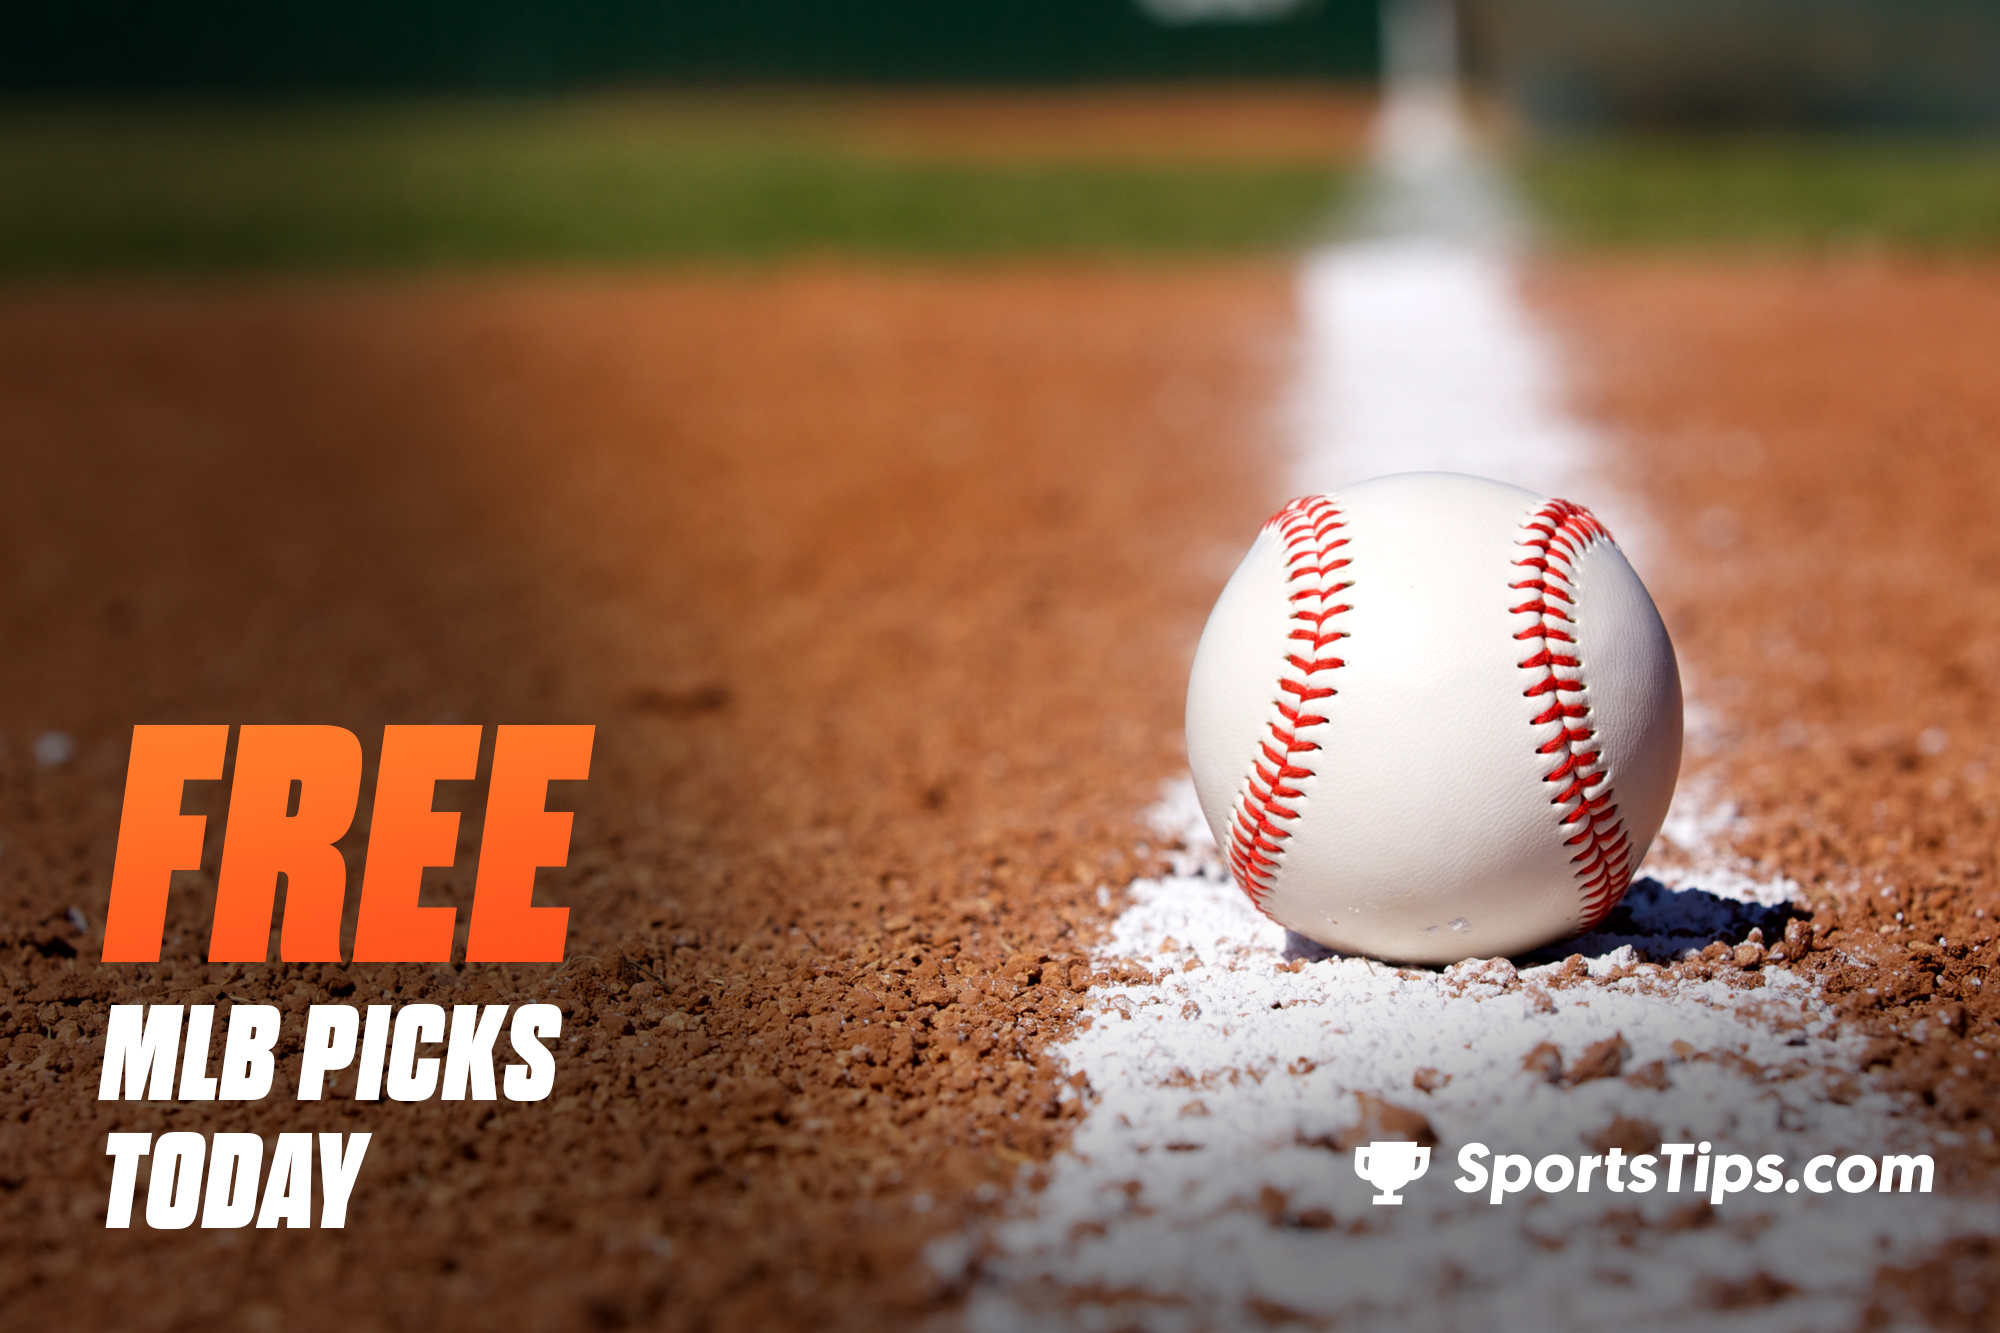 Free MLB Picks Today for Saturday, July 3rd, 2021